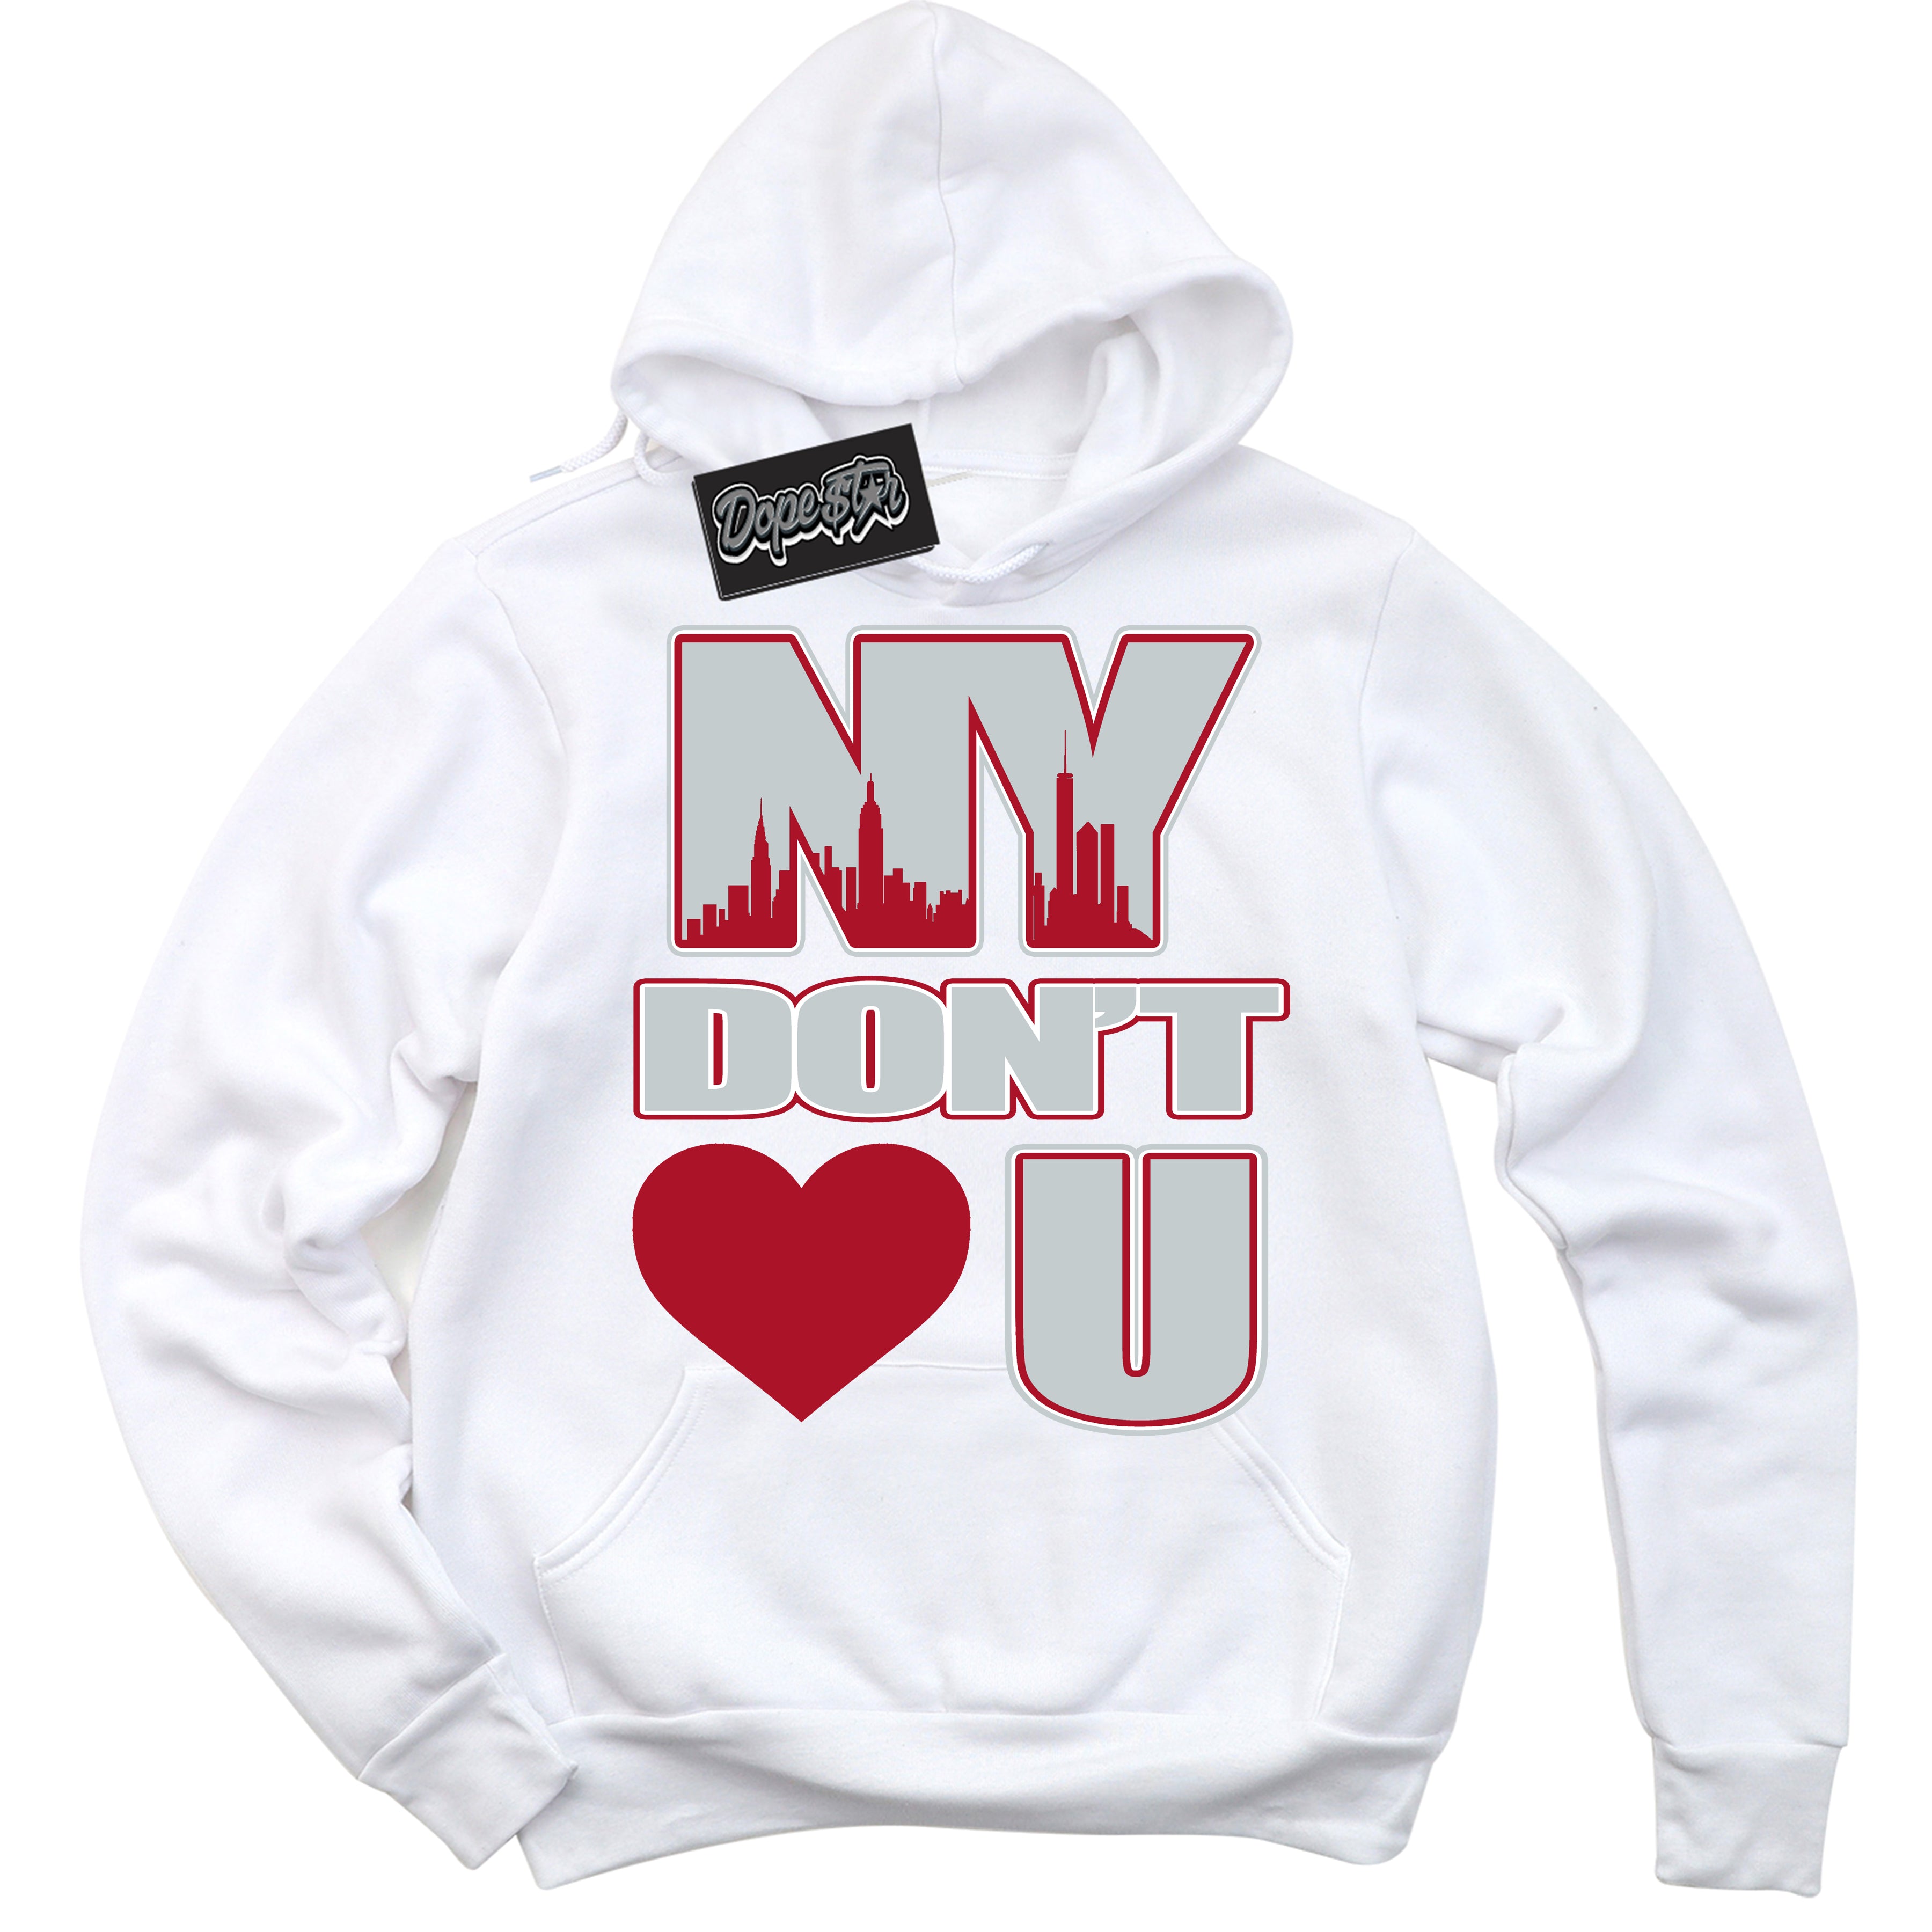 Cool White Hoodie with “ NY Don't Love You ”  design that Perfectly Matches Reverse Ultraman Sneakers.